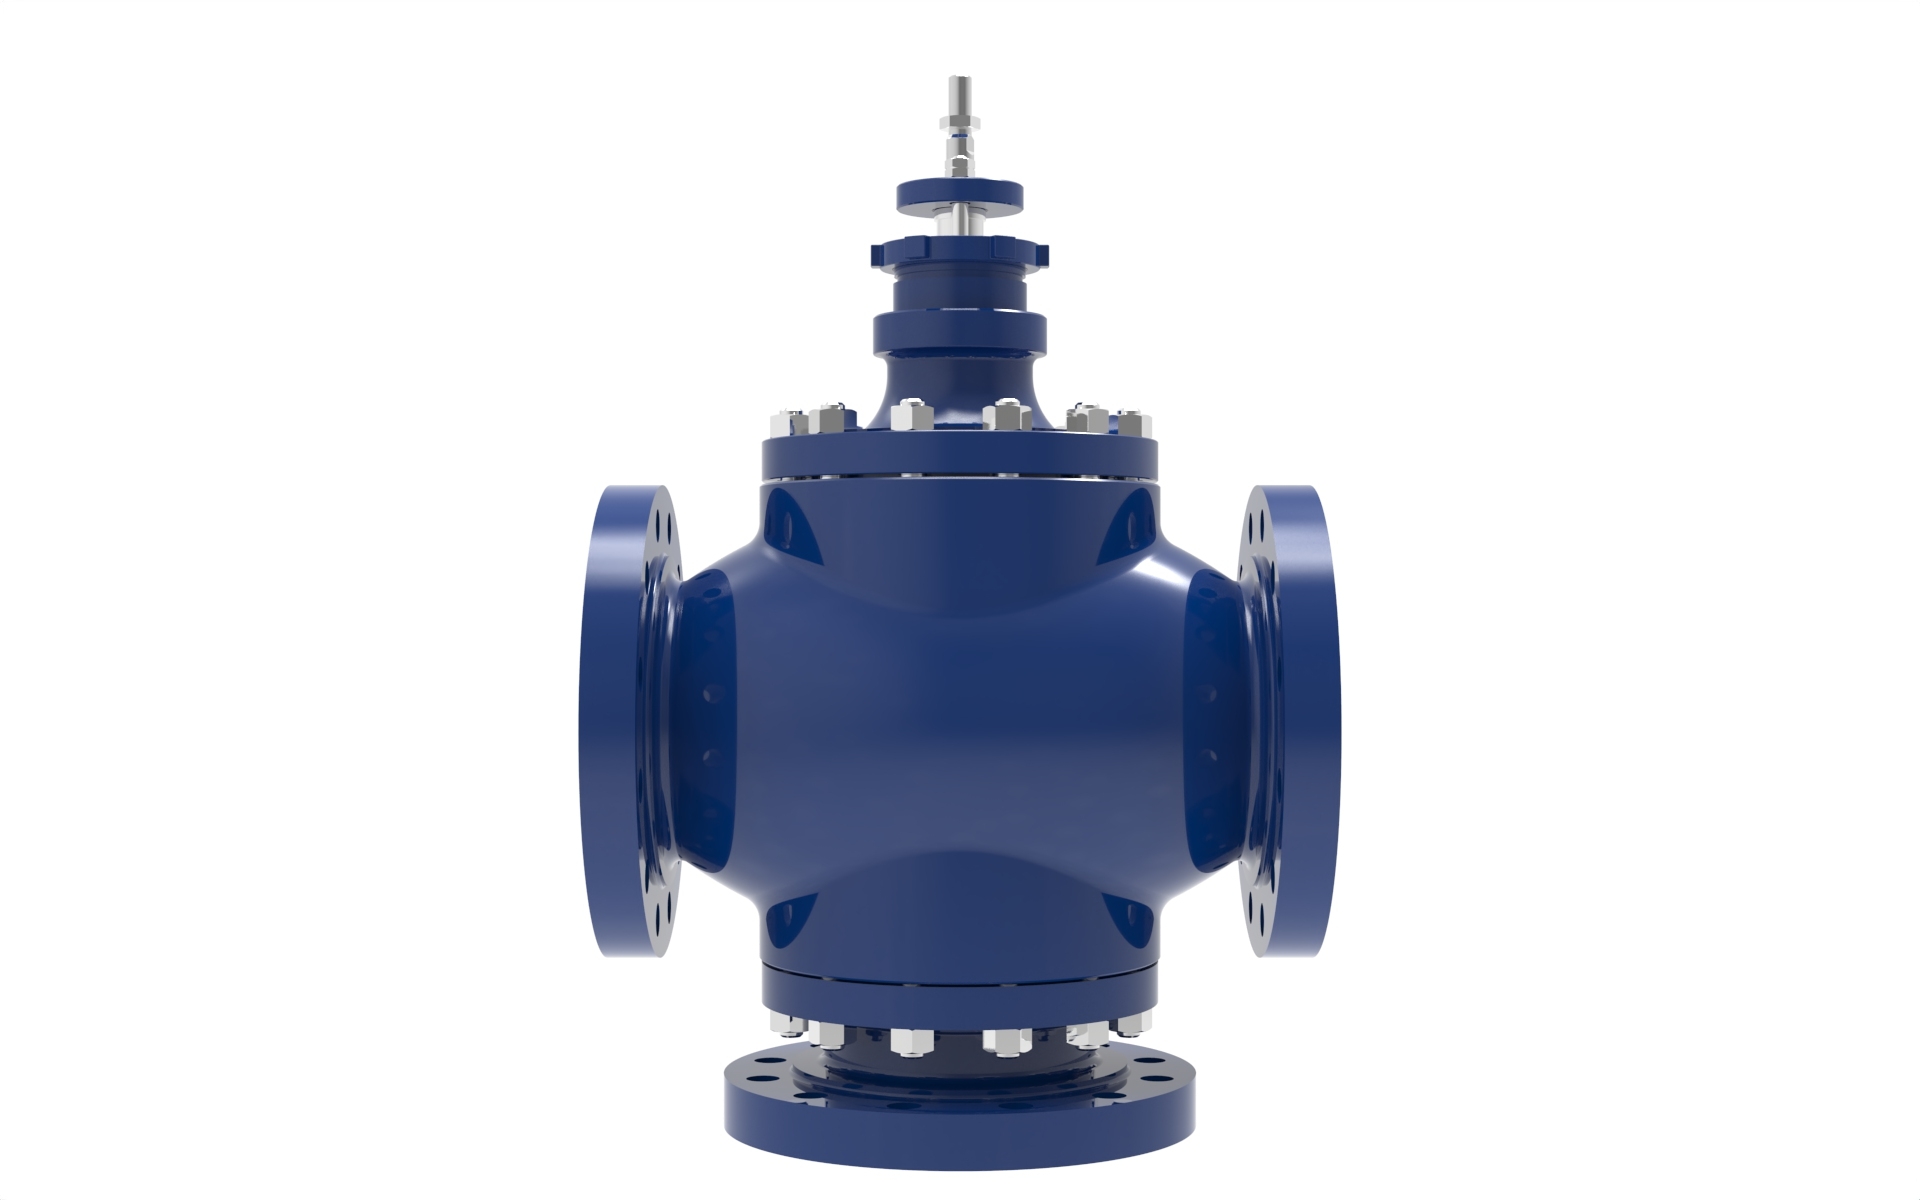 Right side view of a Blakeborough BV830 Three Way Valve manufactured by Trillium Flow Technologies